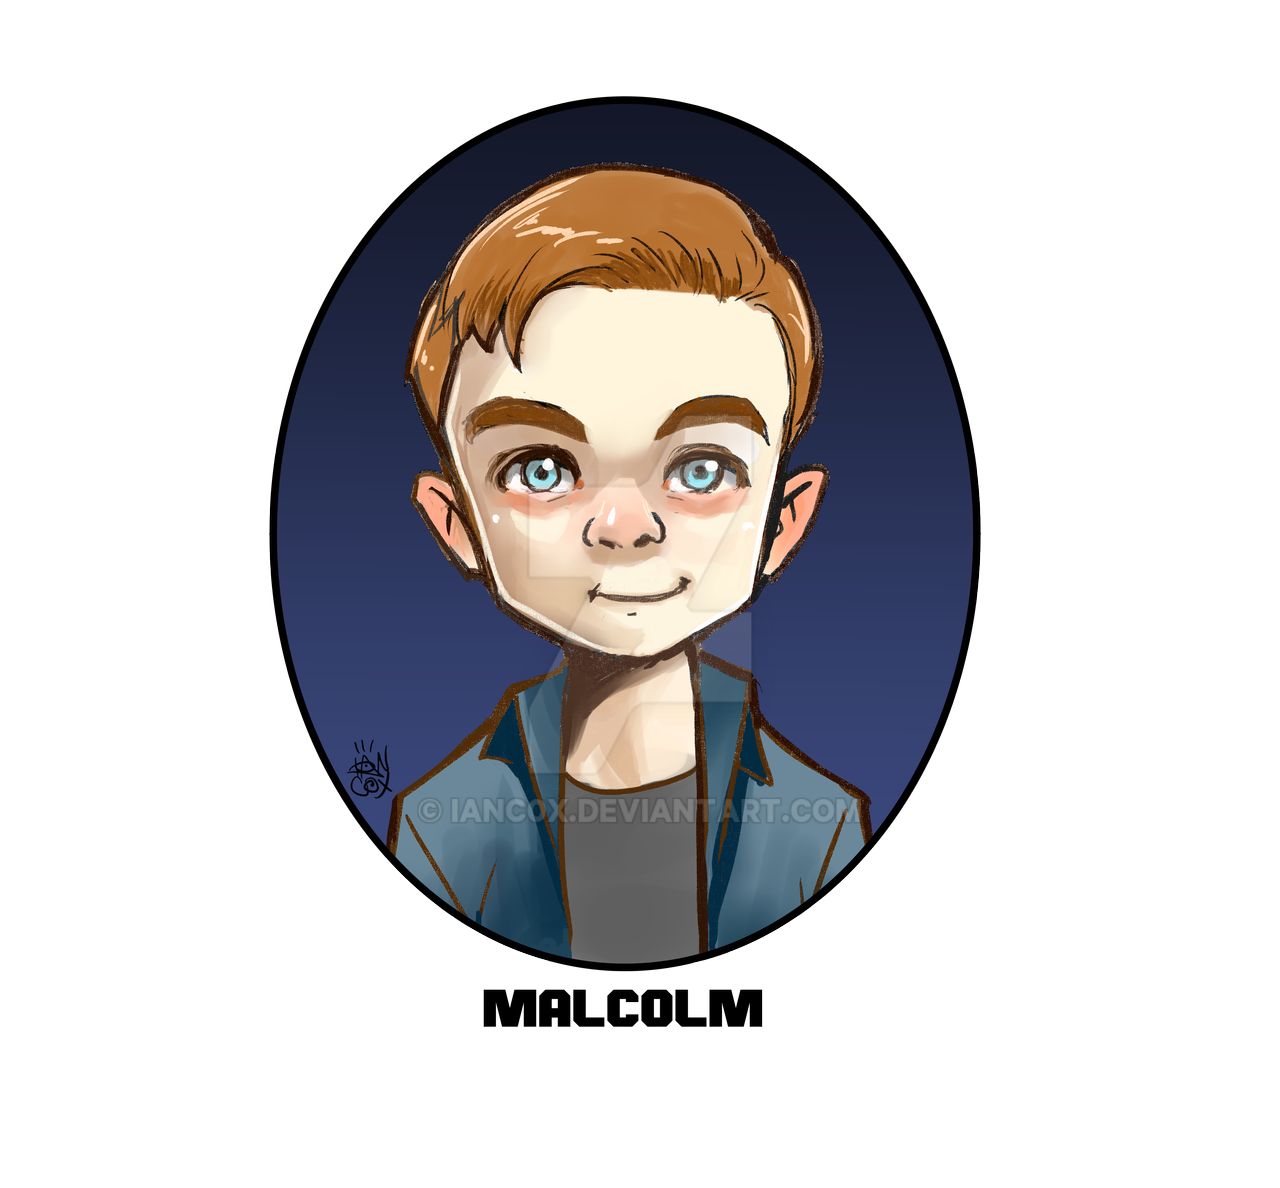 &quot;Malcolm in the Middle&quot; by ianc0x